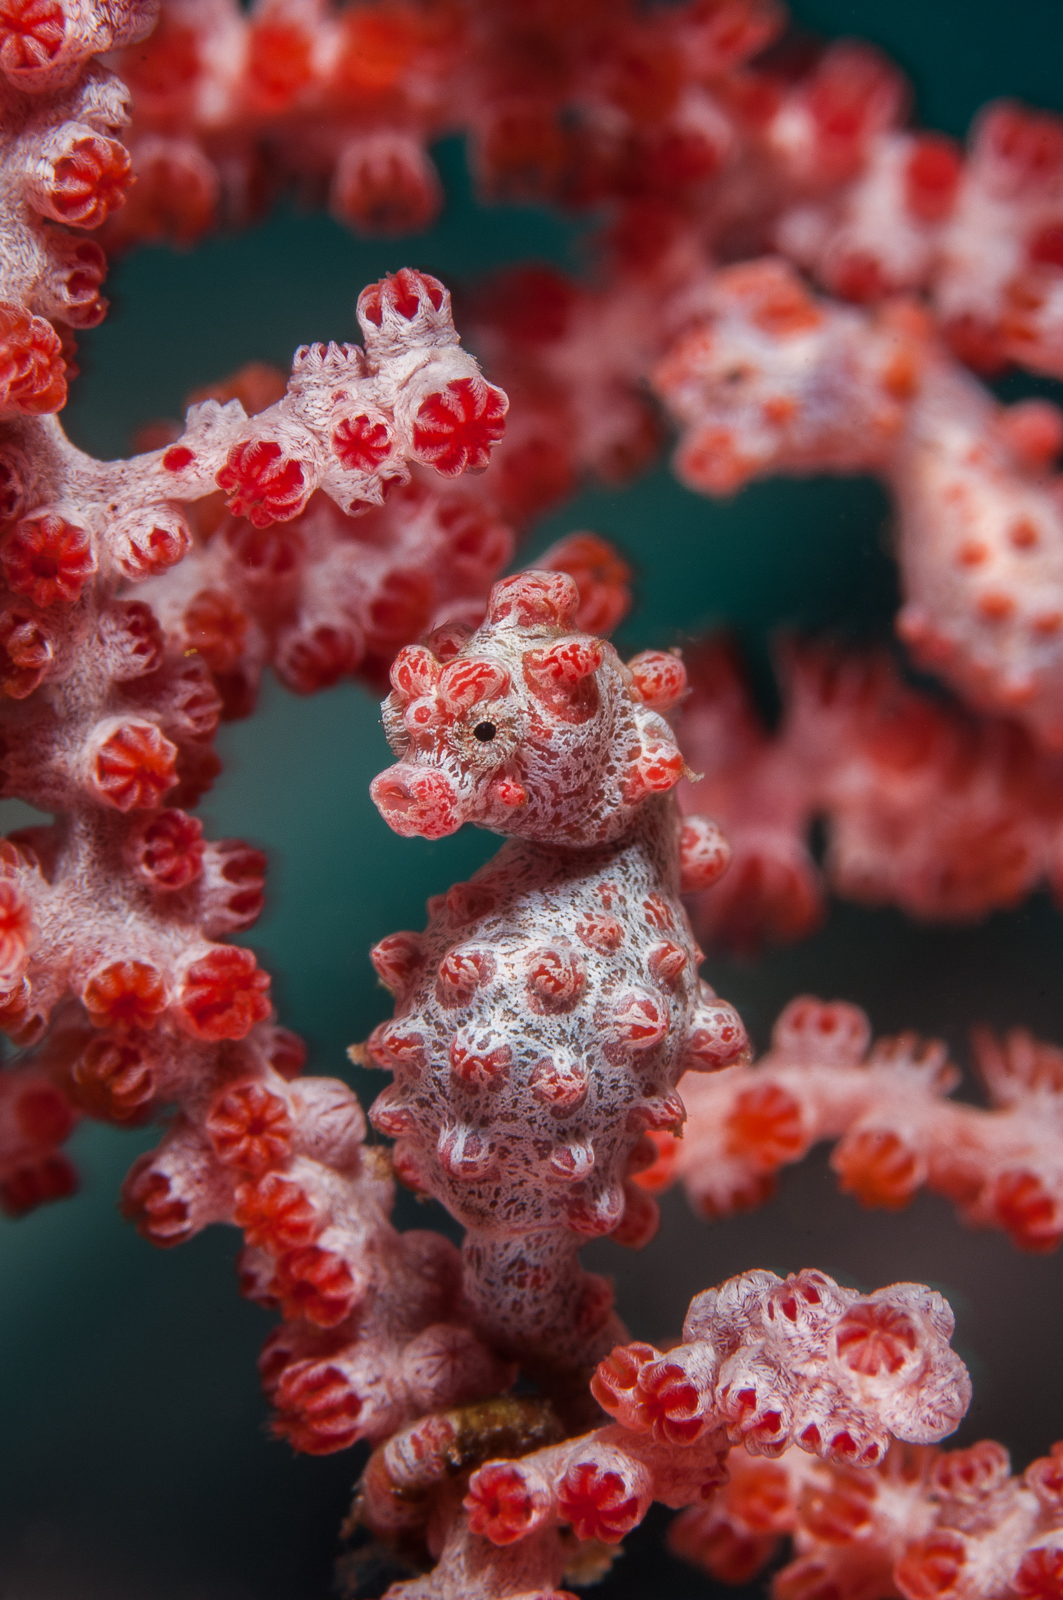 Bargibant's pygmy seahorses are perfectly camouflaged to match the gorgonian sea fans they live on. Photograph by Richard Smith – OceanRealmImages.com